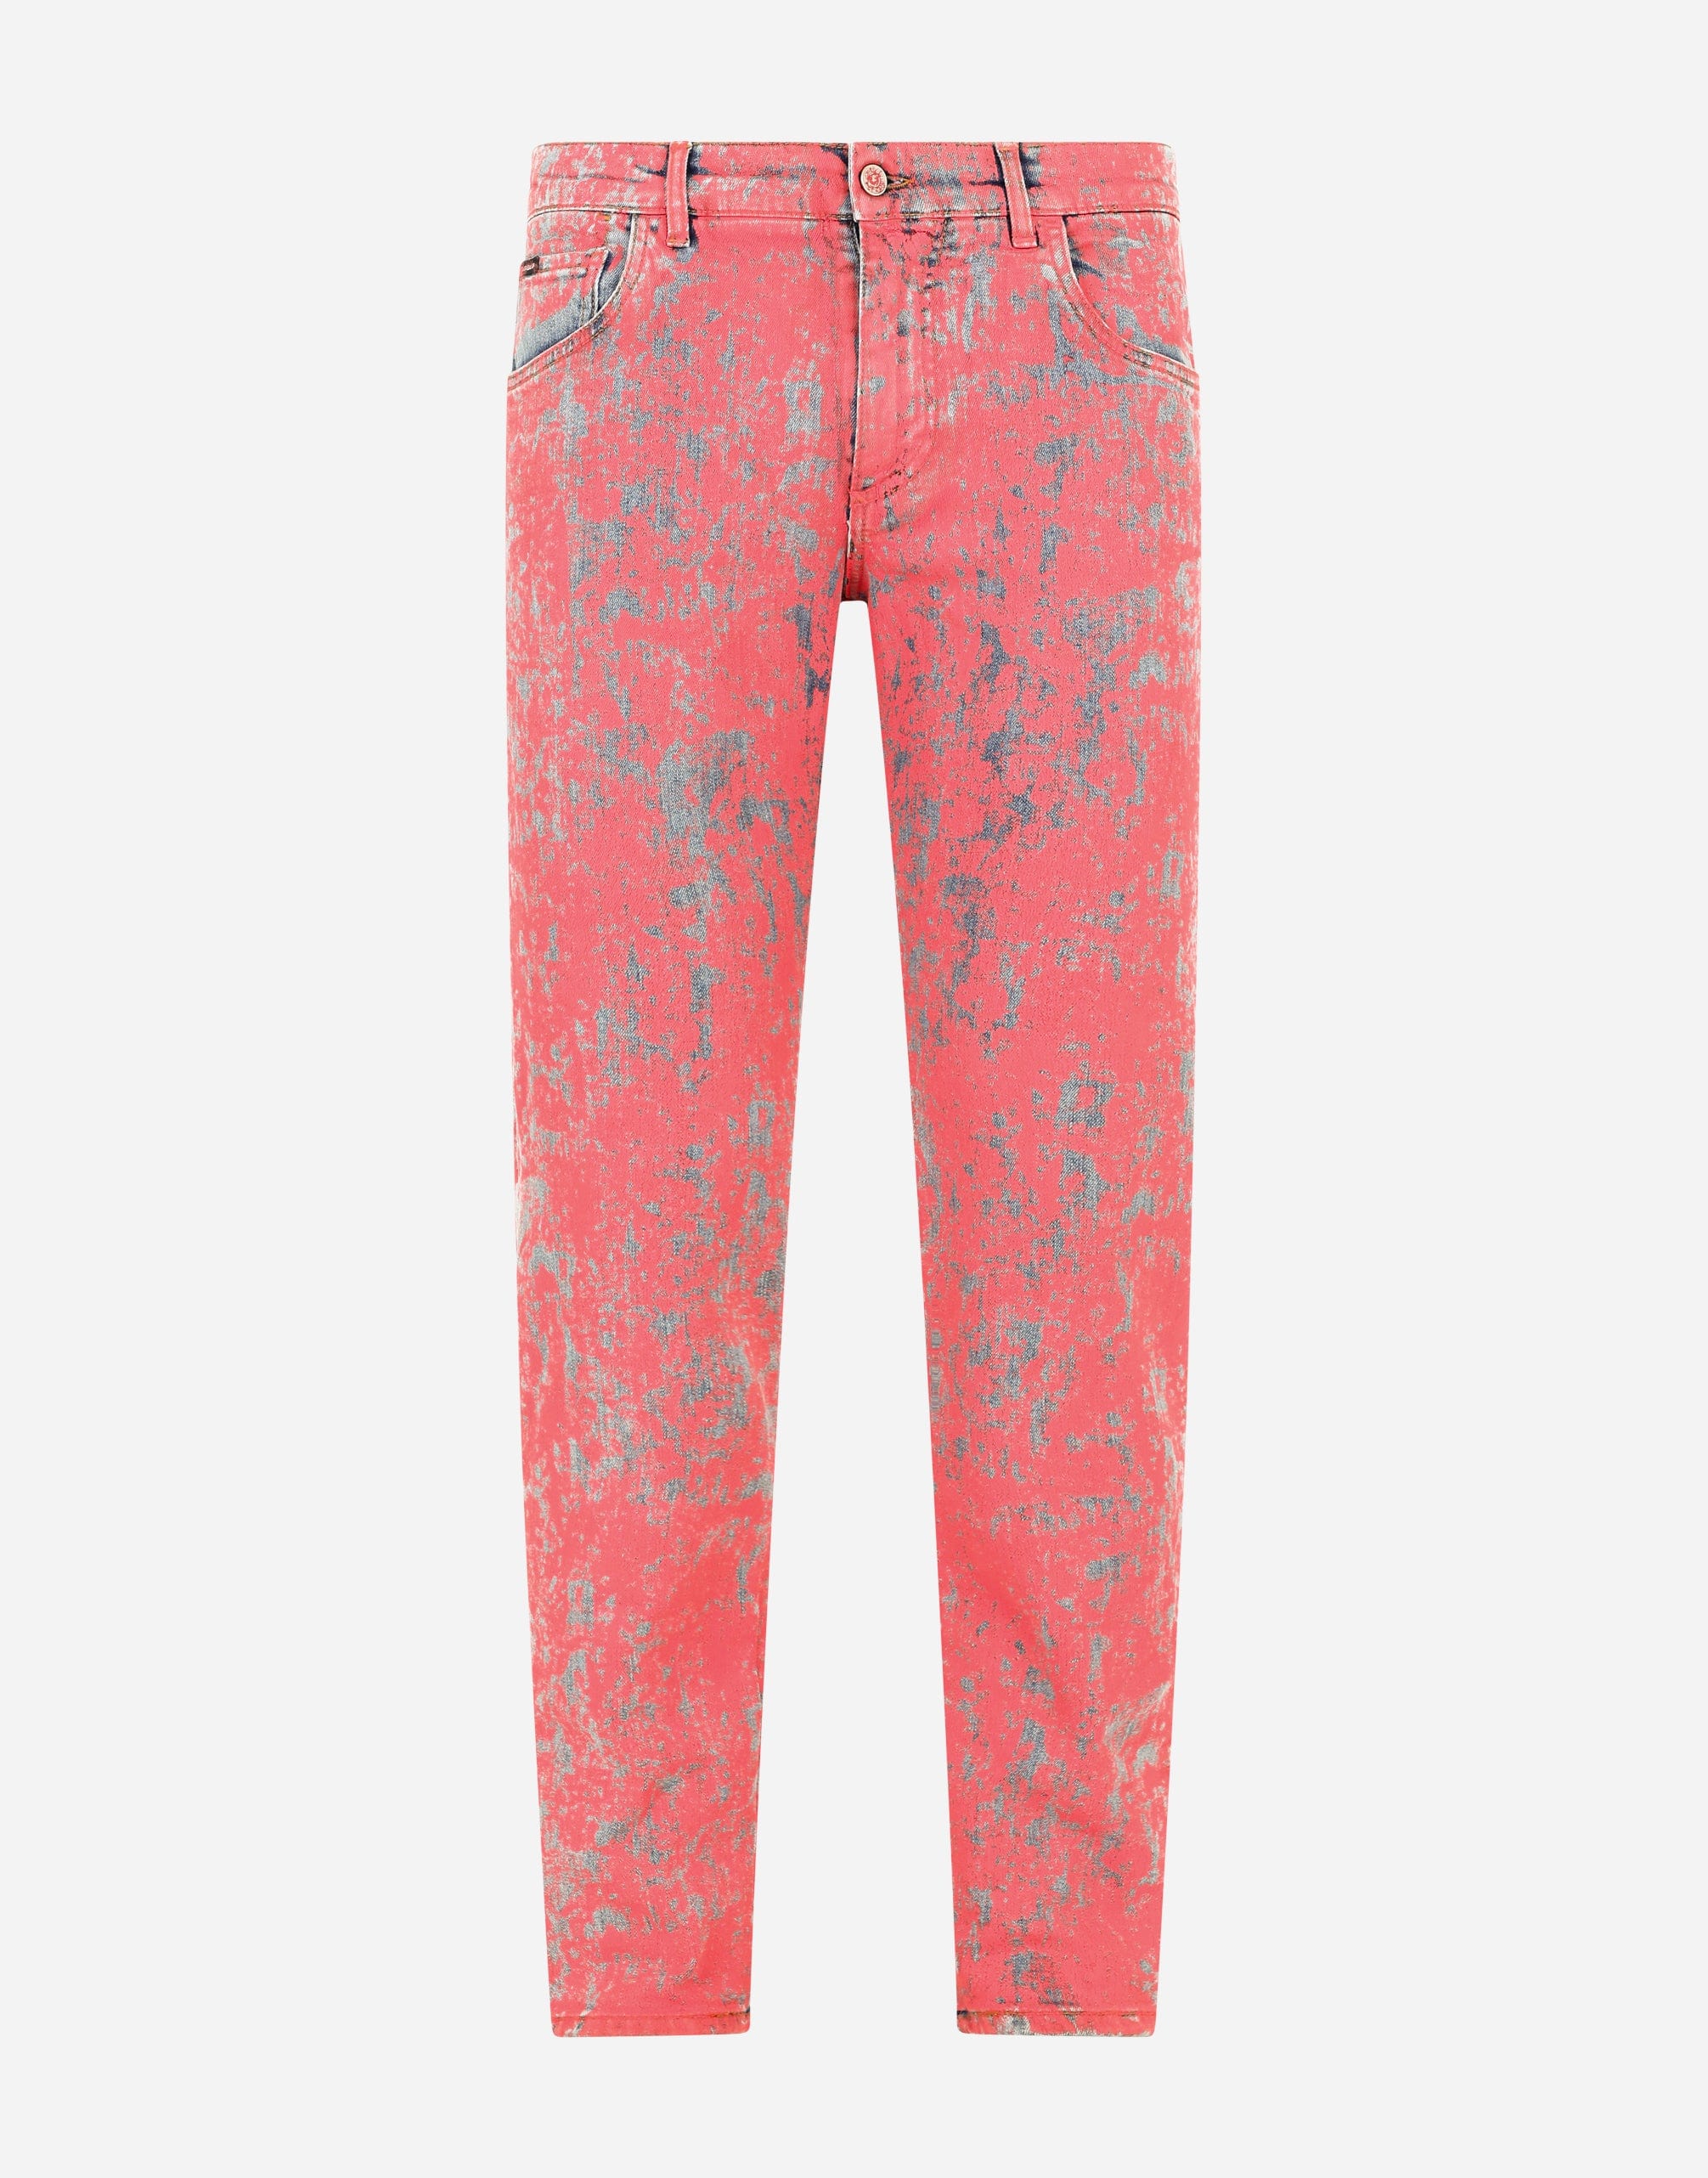 Dolce & Gabbana Slim-Fit Stretch Jeans With Marbled Print